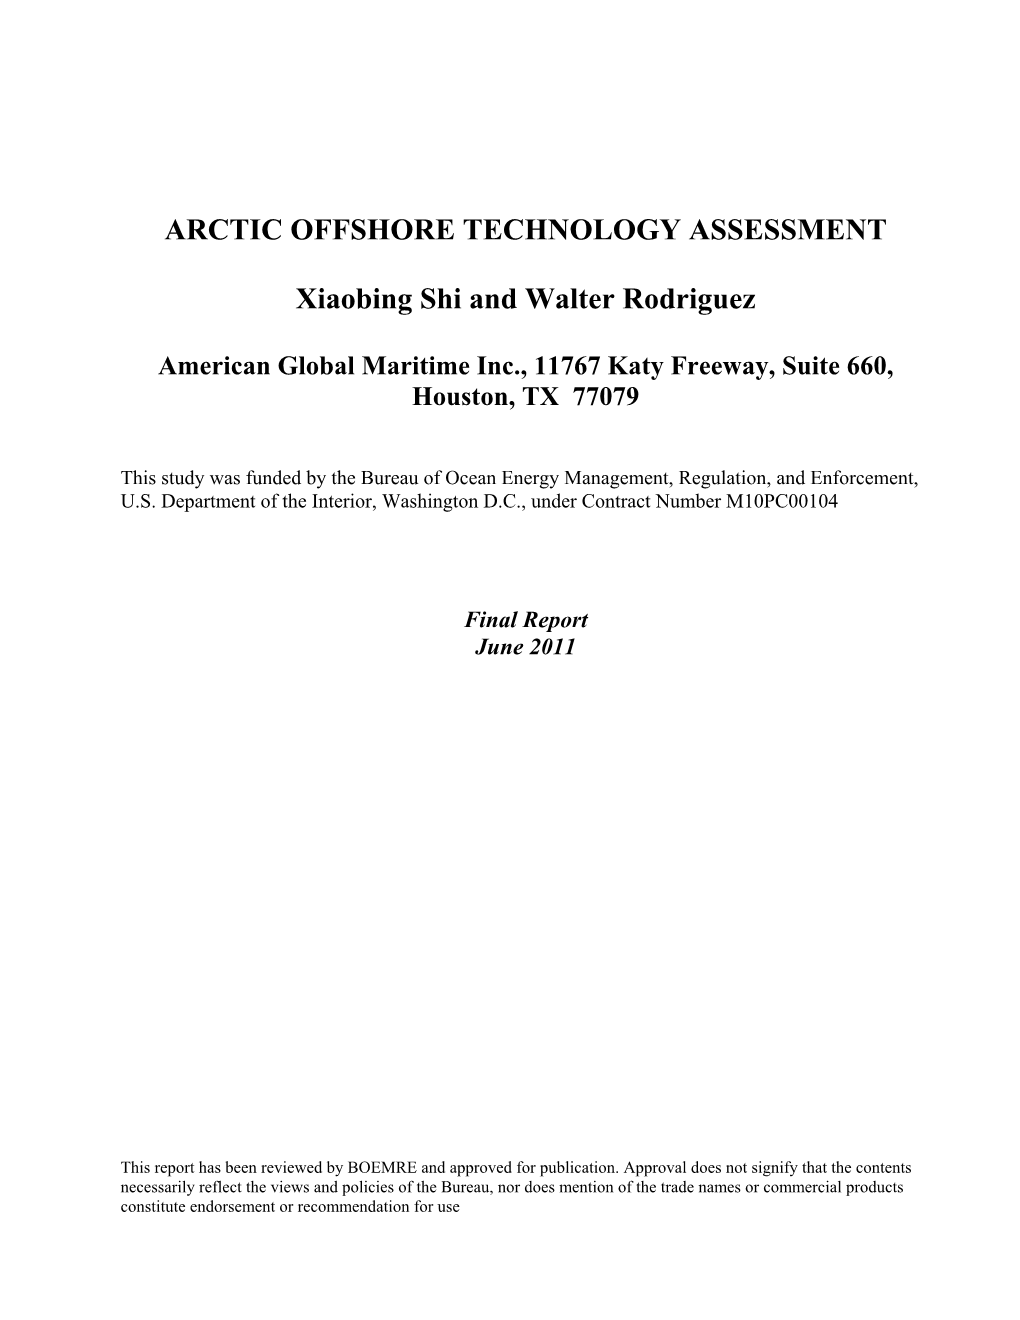 Arctic Offshore Technology Assessment